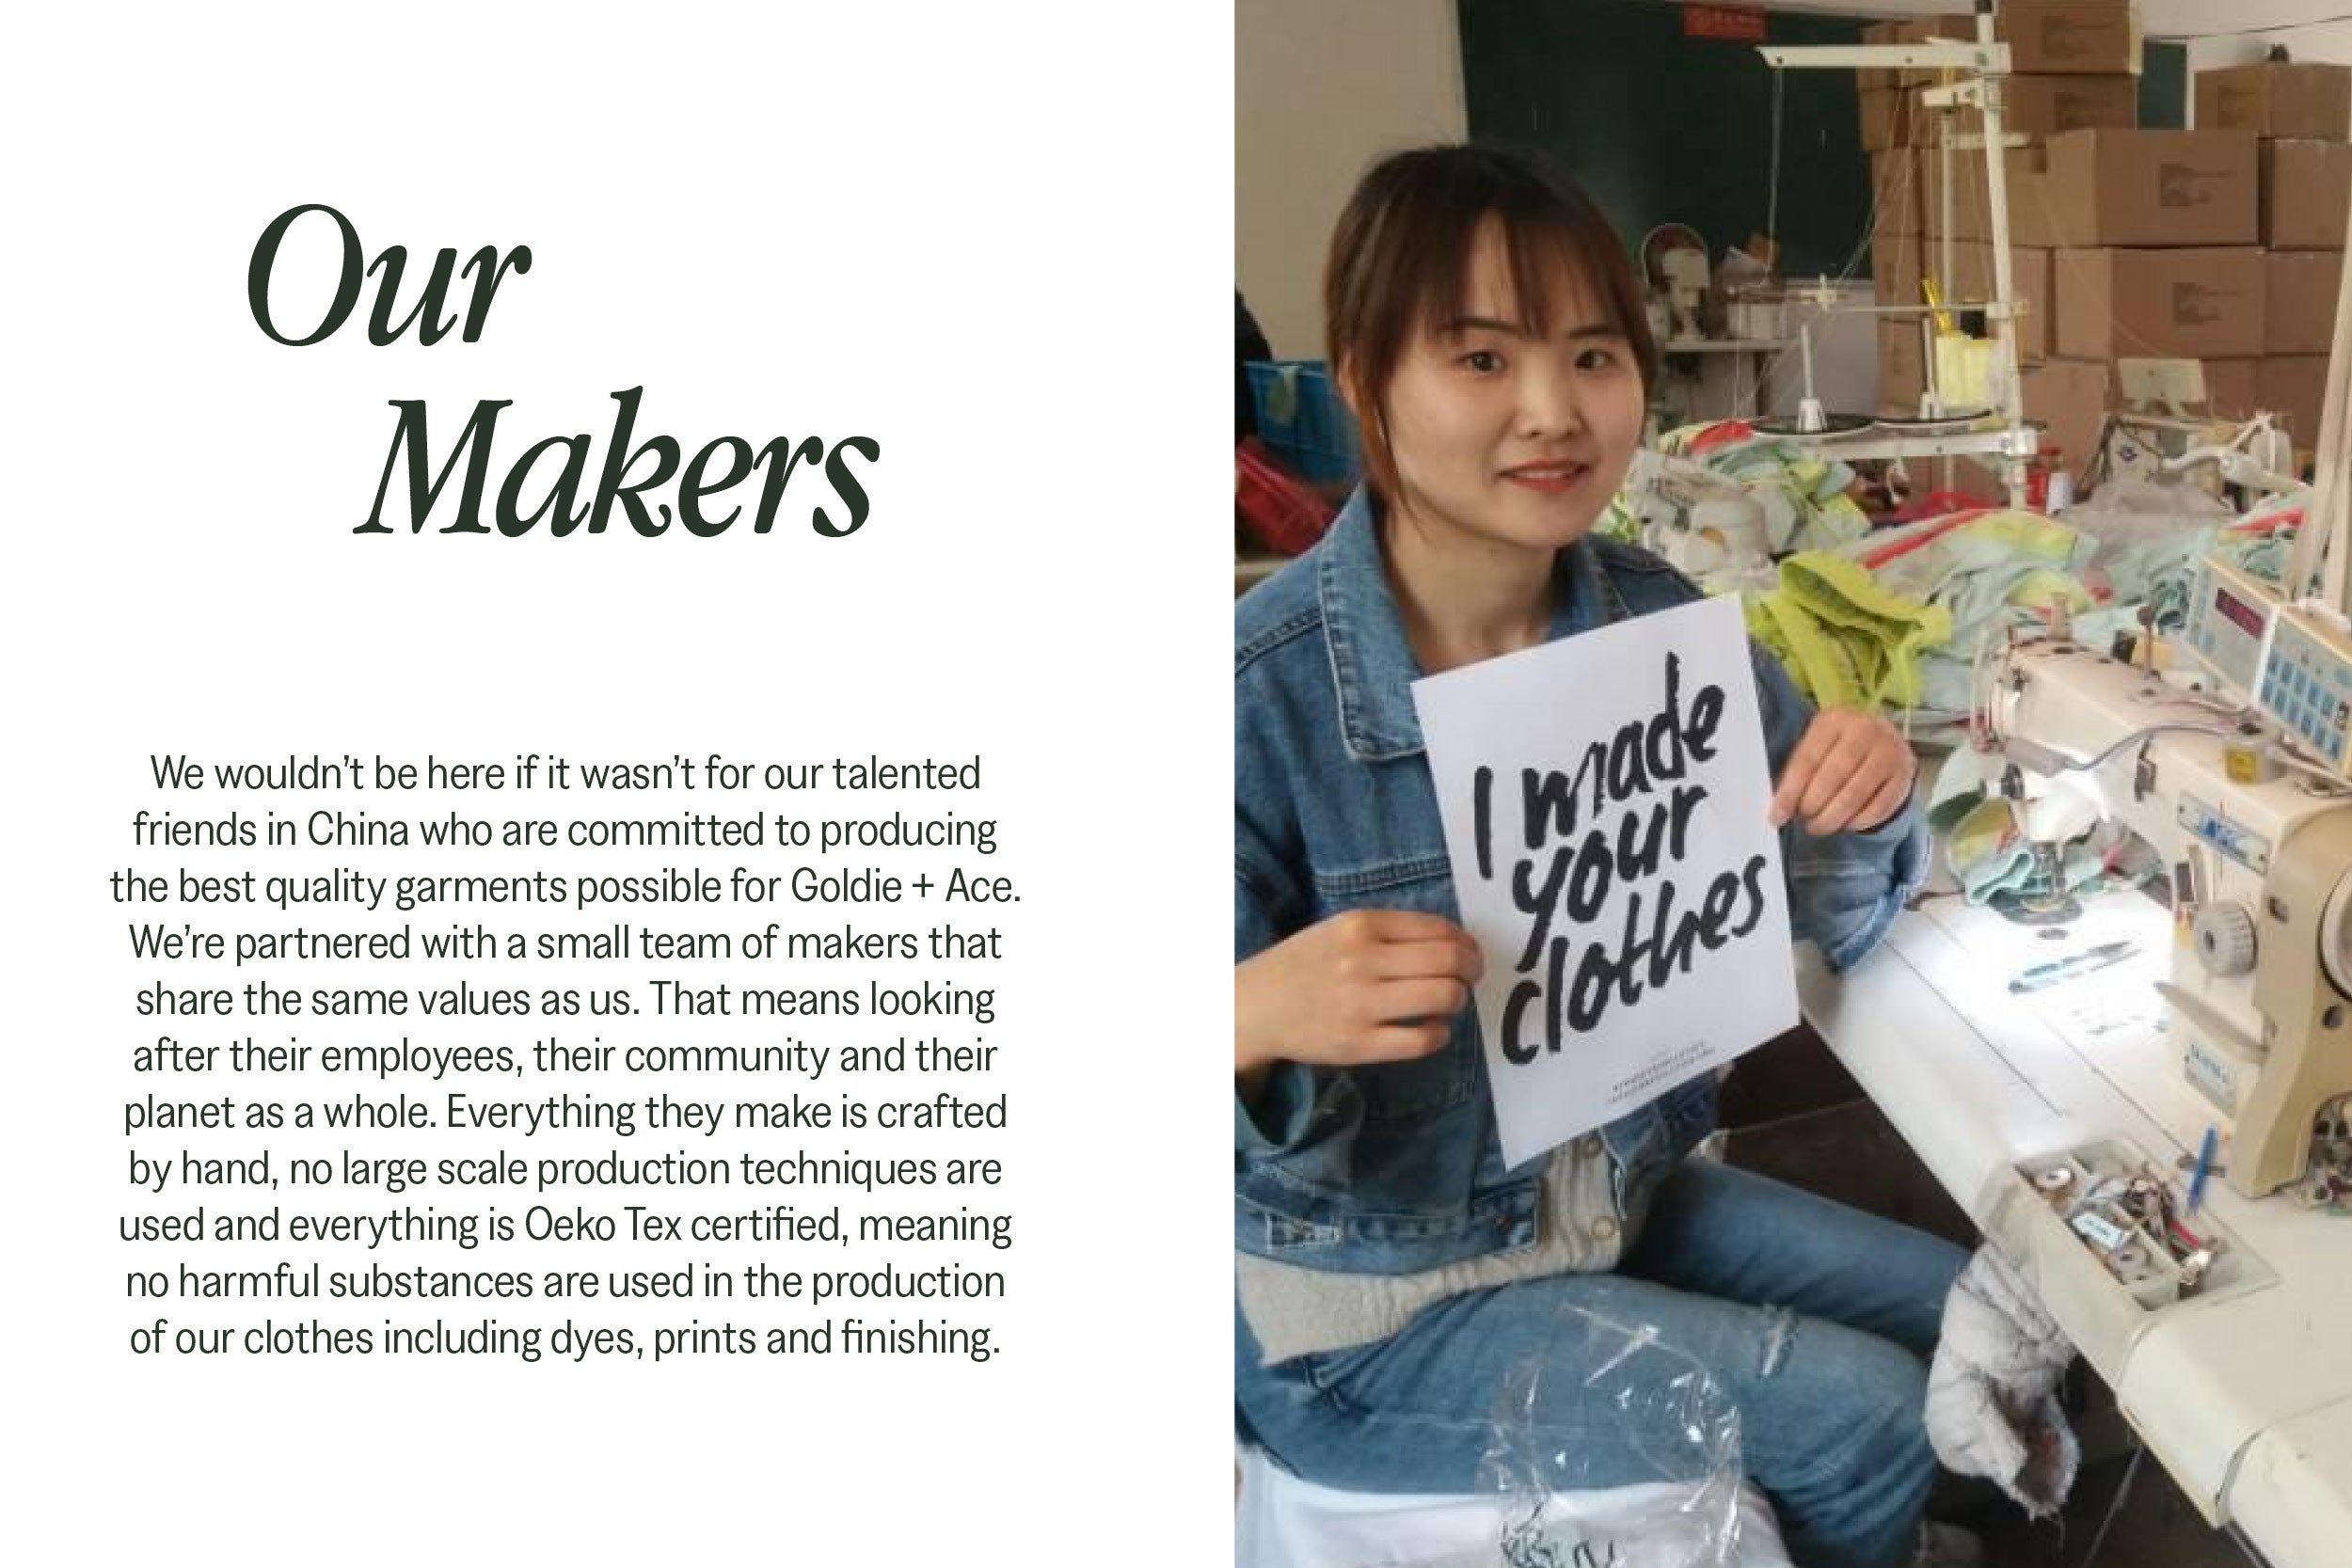 Our Makers. We wouldn’t be here if it wasn’t for our talented friends in China who are committed to producing the best quality garments possible for Goldie + Ace. We’re partnered with a small team of makers that share the same values as us. That means looking after their employees, their community and their planet as a whole. Everything they make is crafted by hand, no large scale production techniques are used and everything is Oeko Tex certified, meaning no harmful substances are used in the production of our clothes including dyes, prints and finishing.